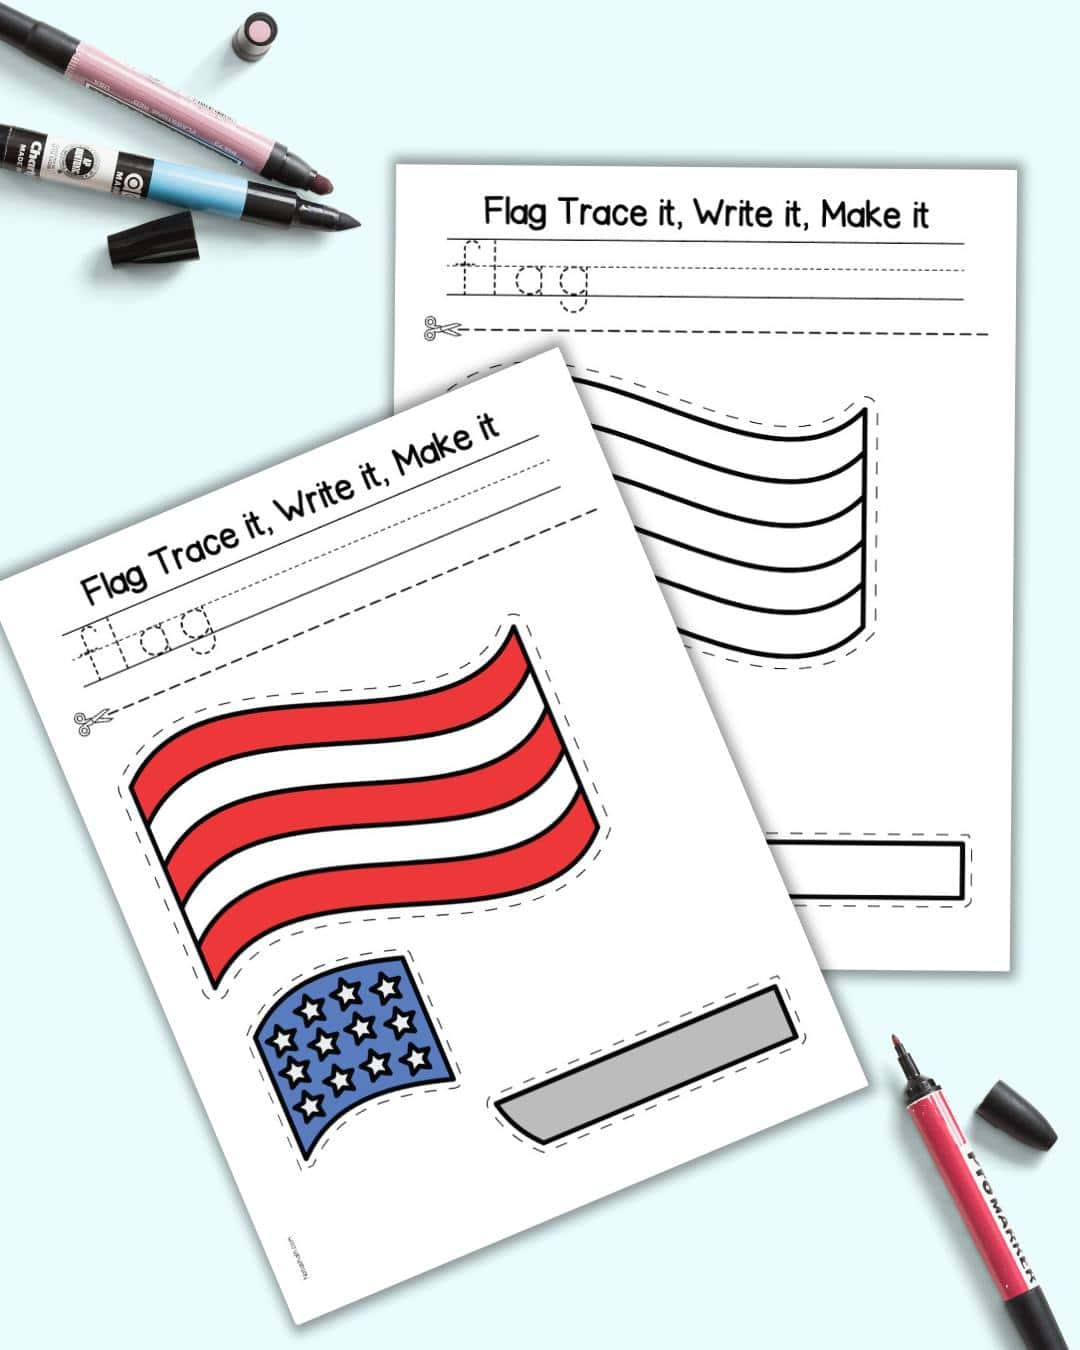 Two pages of printable flag craft with space to trace and write "flag" and a three part cut and paste craft. One page is color and the other black and white. 